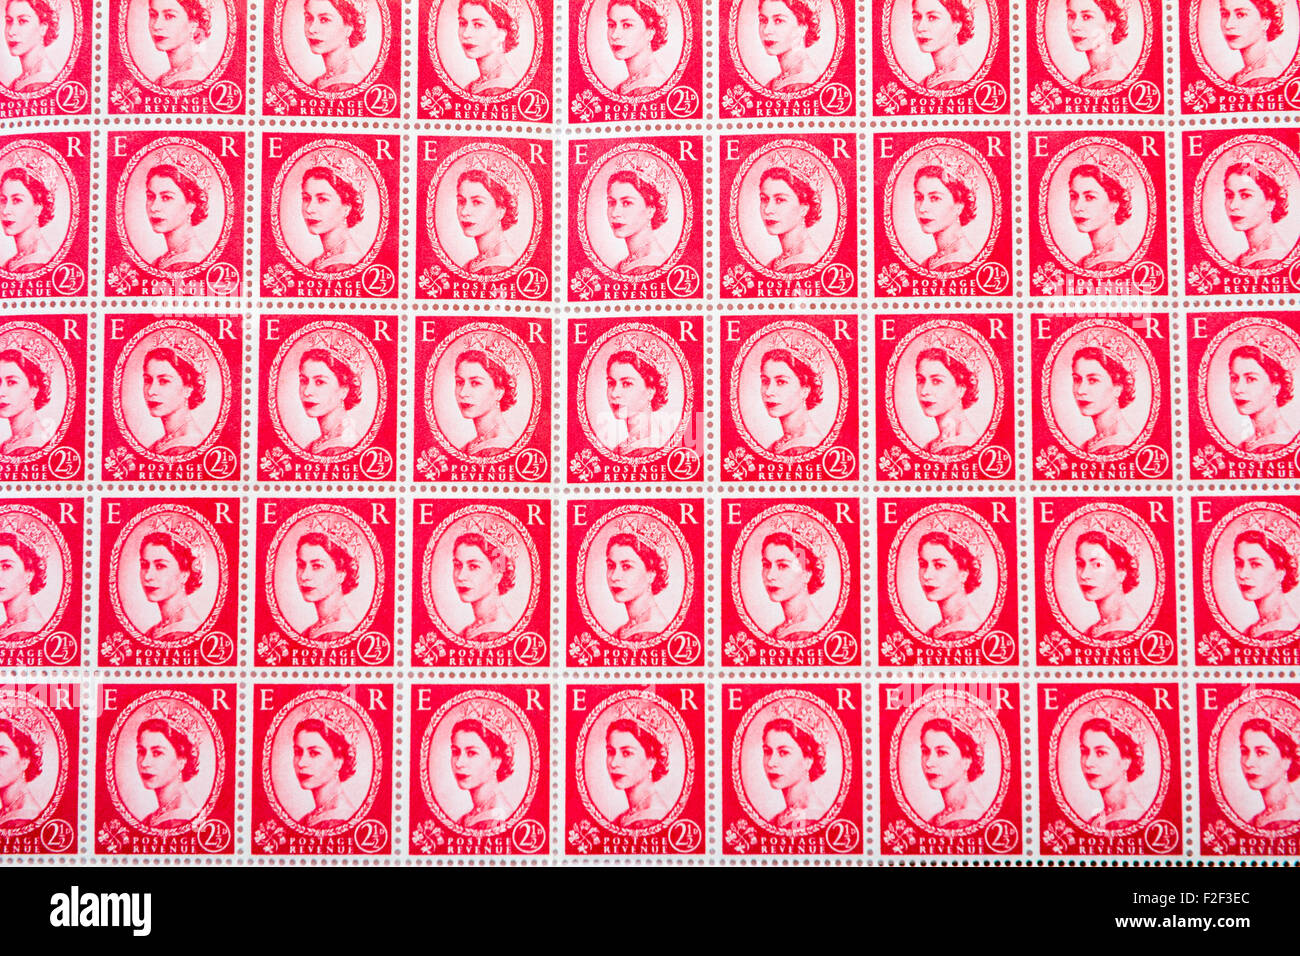 Sheet of 1950's British Royal Mail 2½d red postage stamps from the Wildings definitive issue with portrait of Queen Elizabeth II. Stock Photo